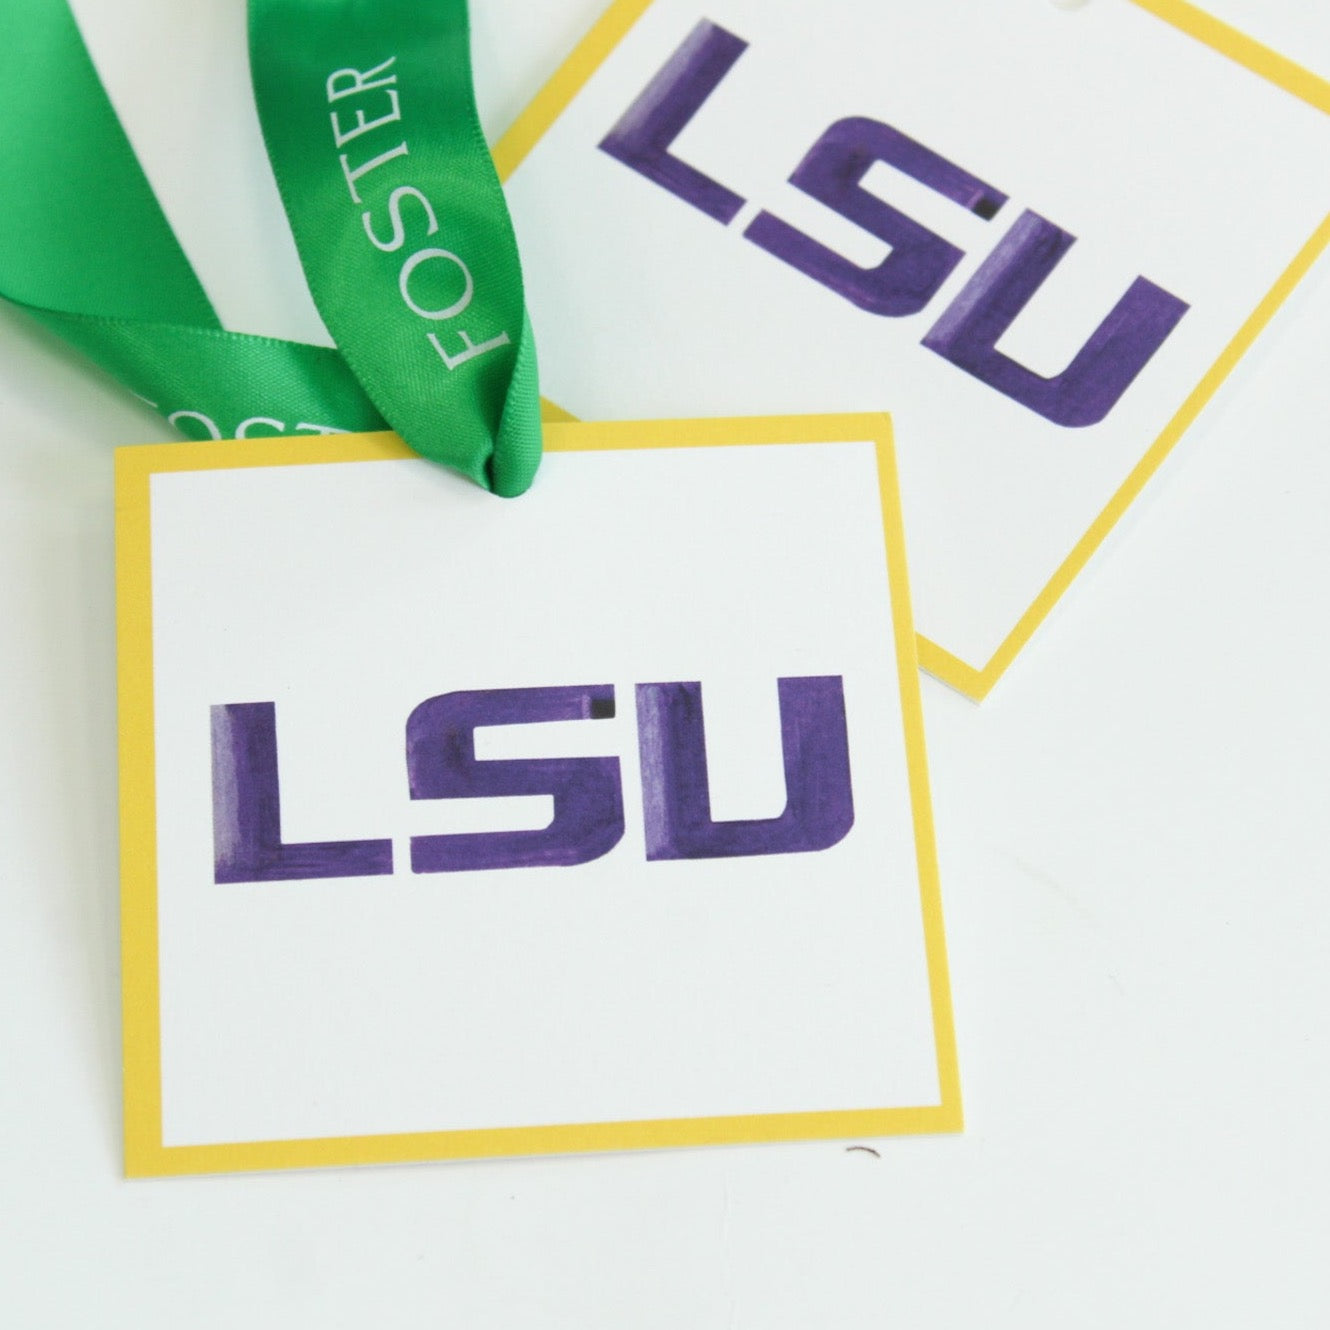 LSU logo gift tags by FOSTER